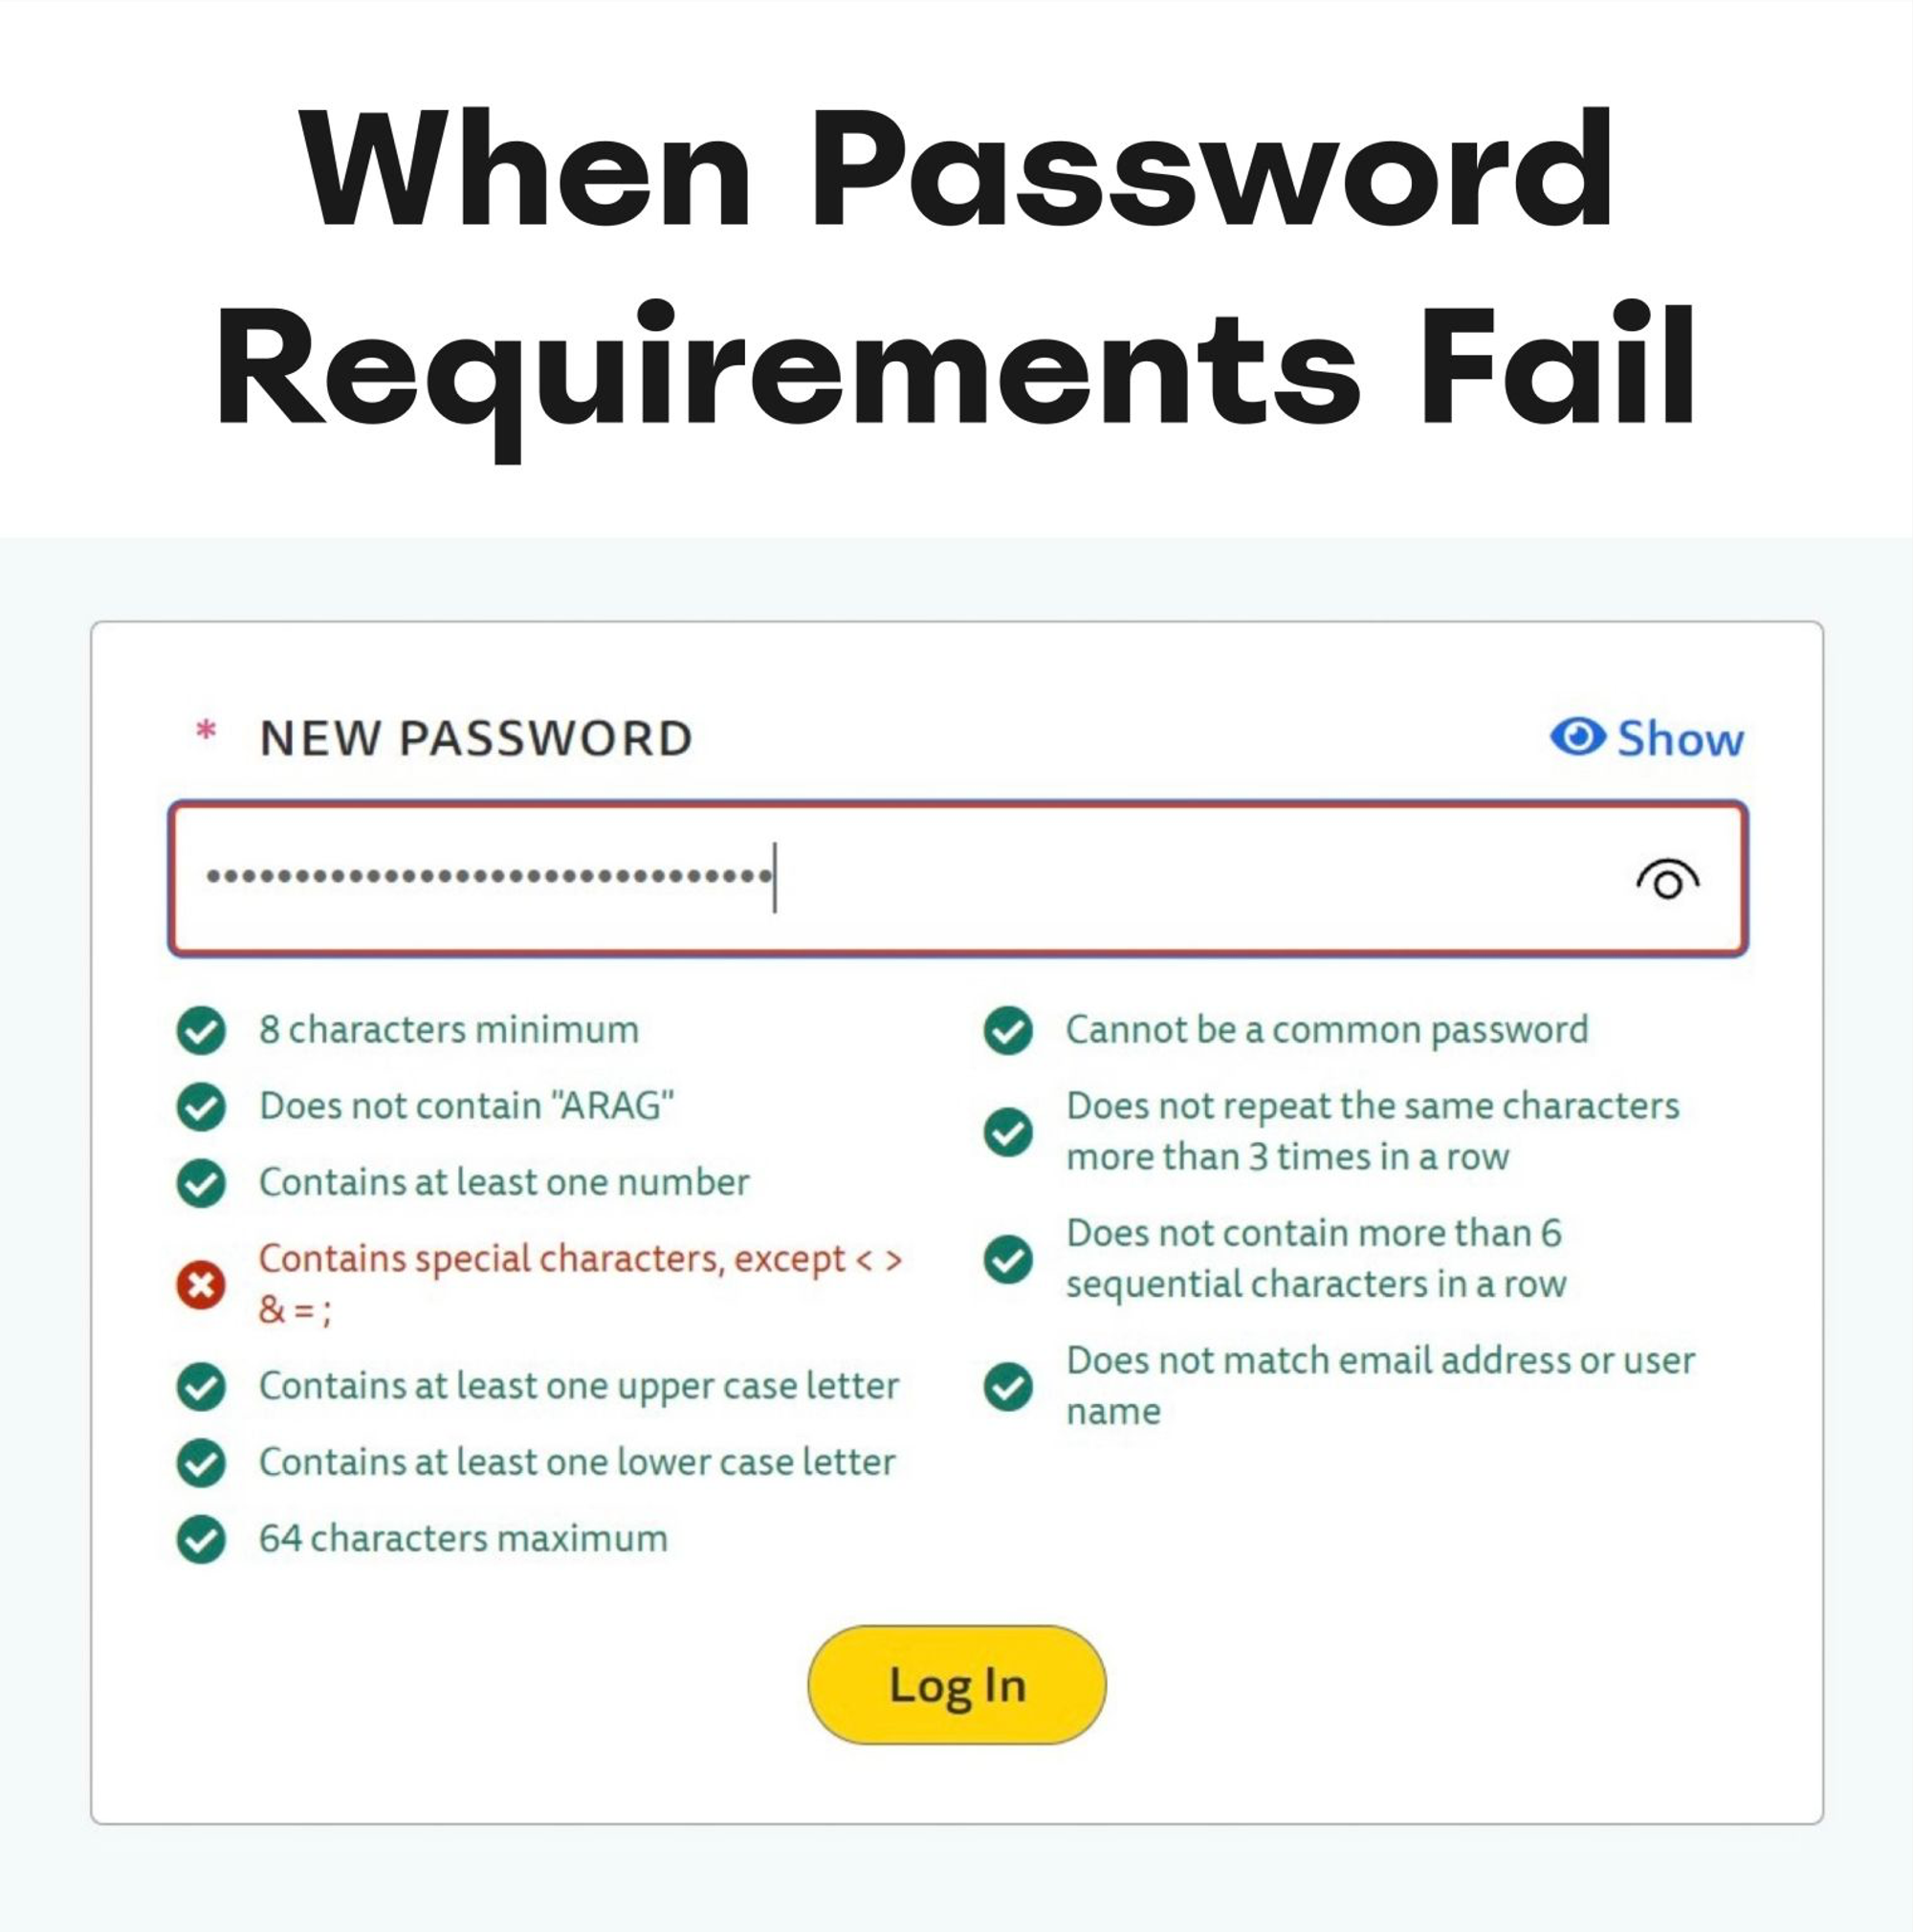 Designing Better Password Requirements UX by Vitaly Friedman